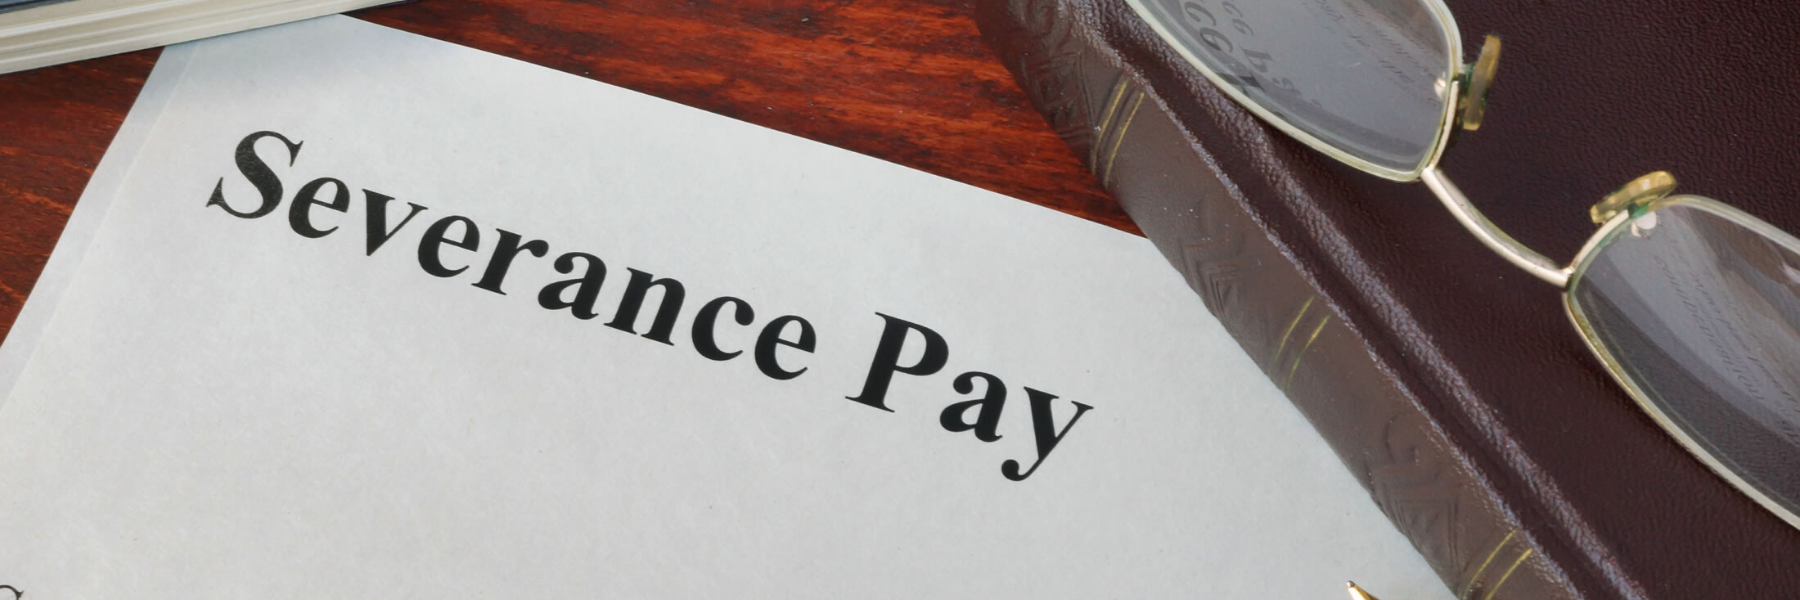 S3170 severance pay law enacted in New Jersey